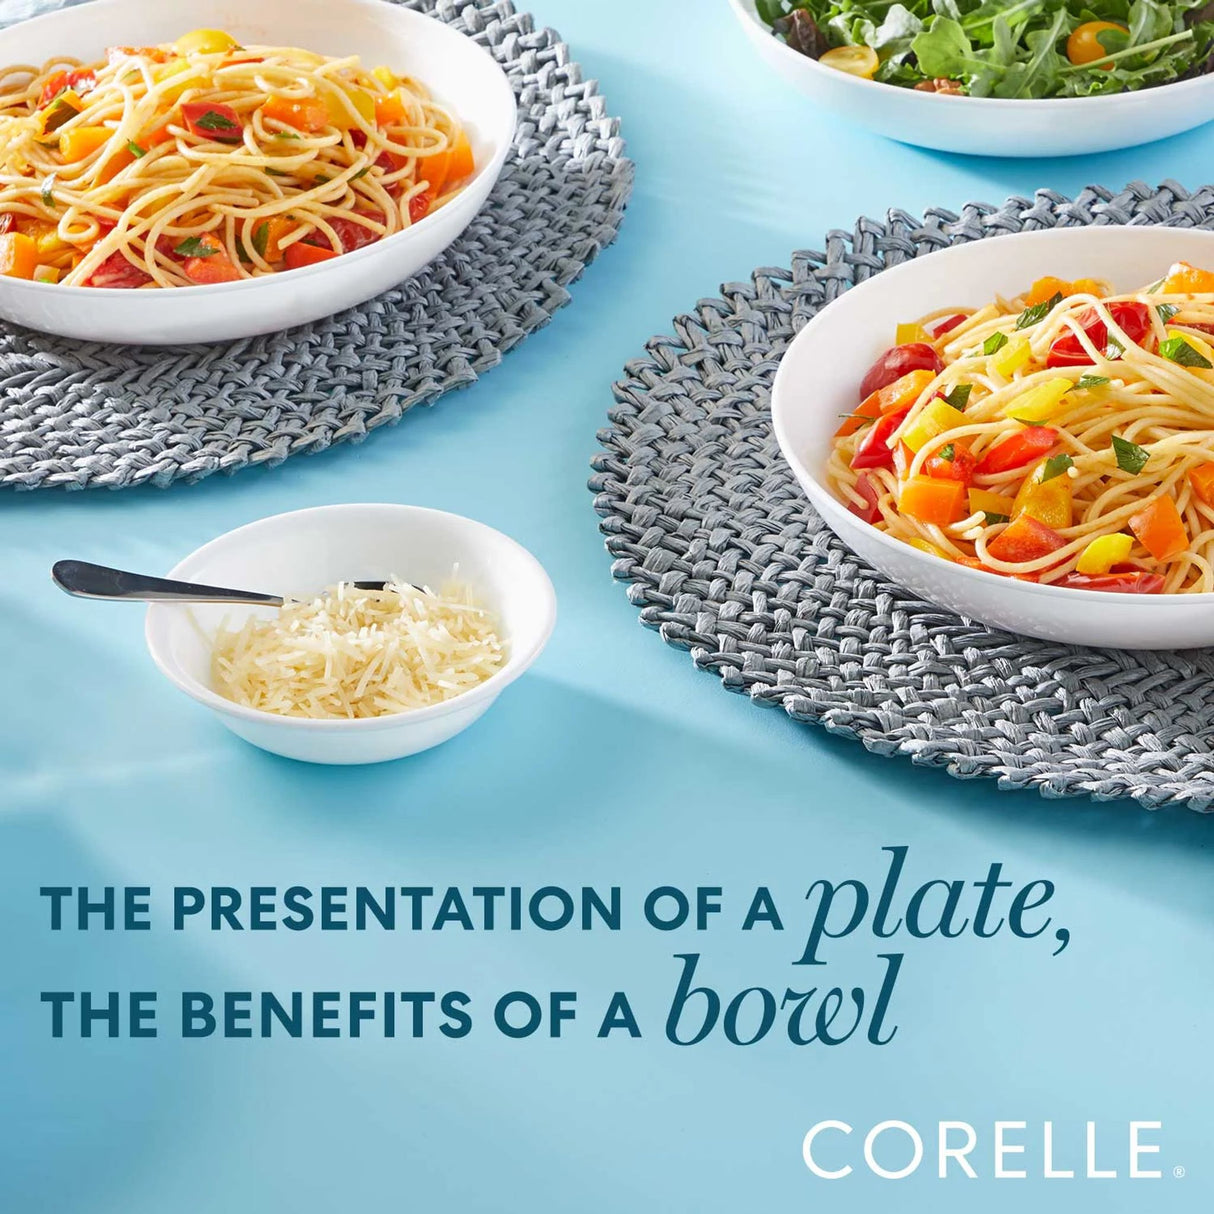 photo of meal bowls, text that says  the presentation of a plate, the benefits of a bowl